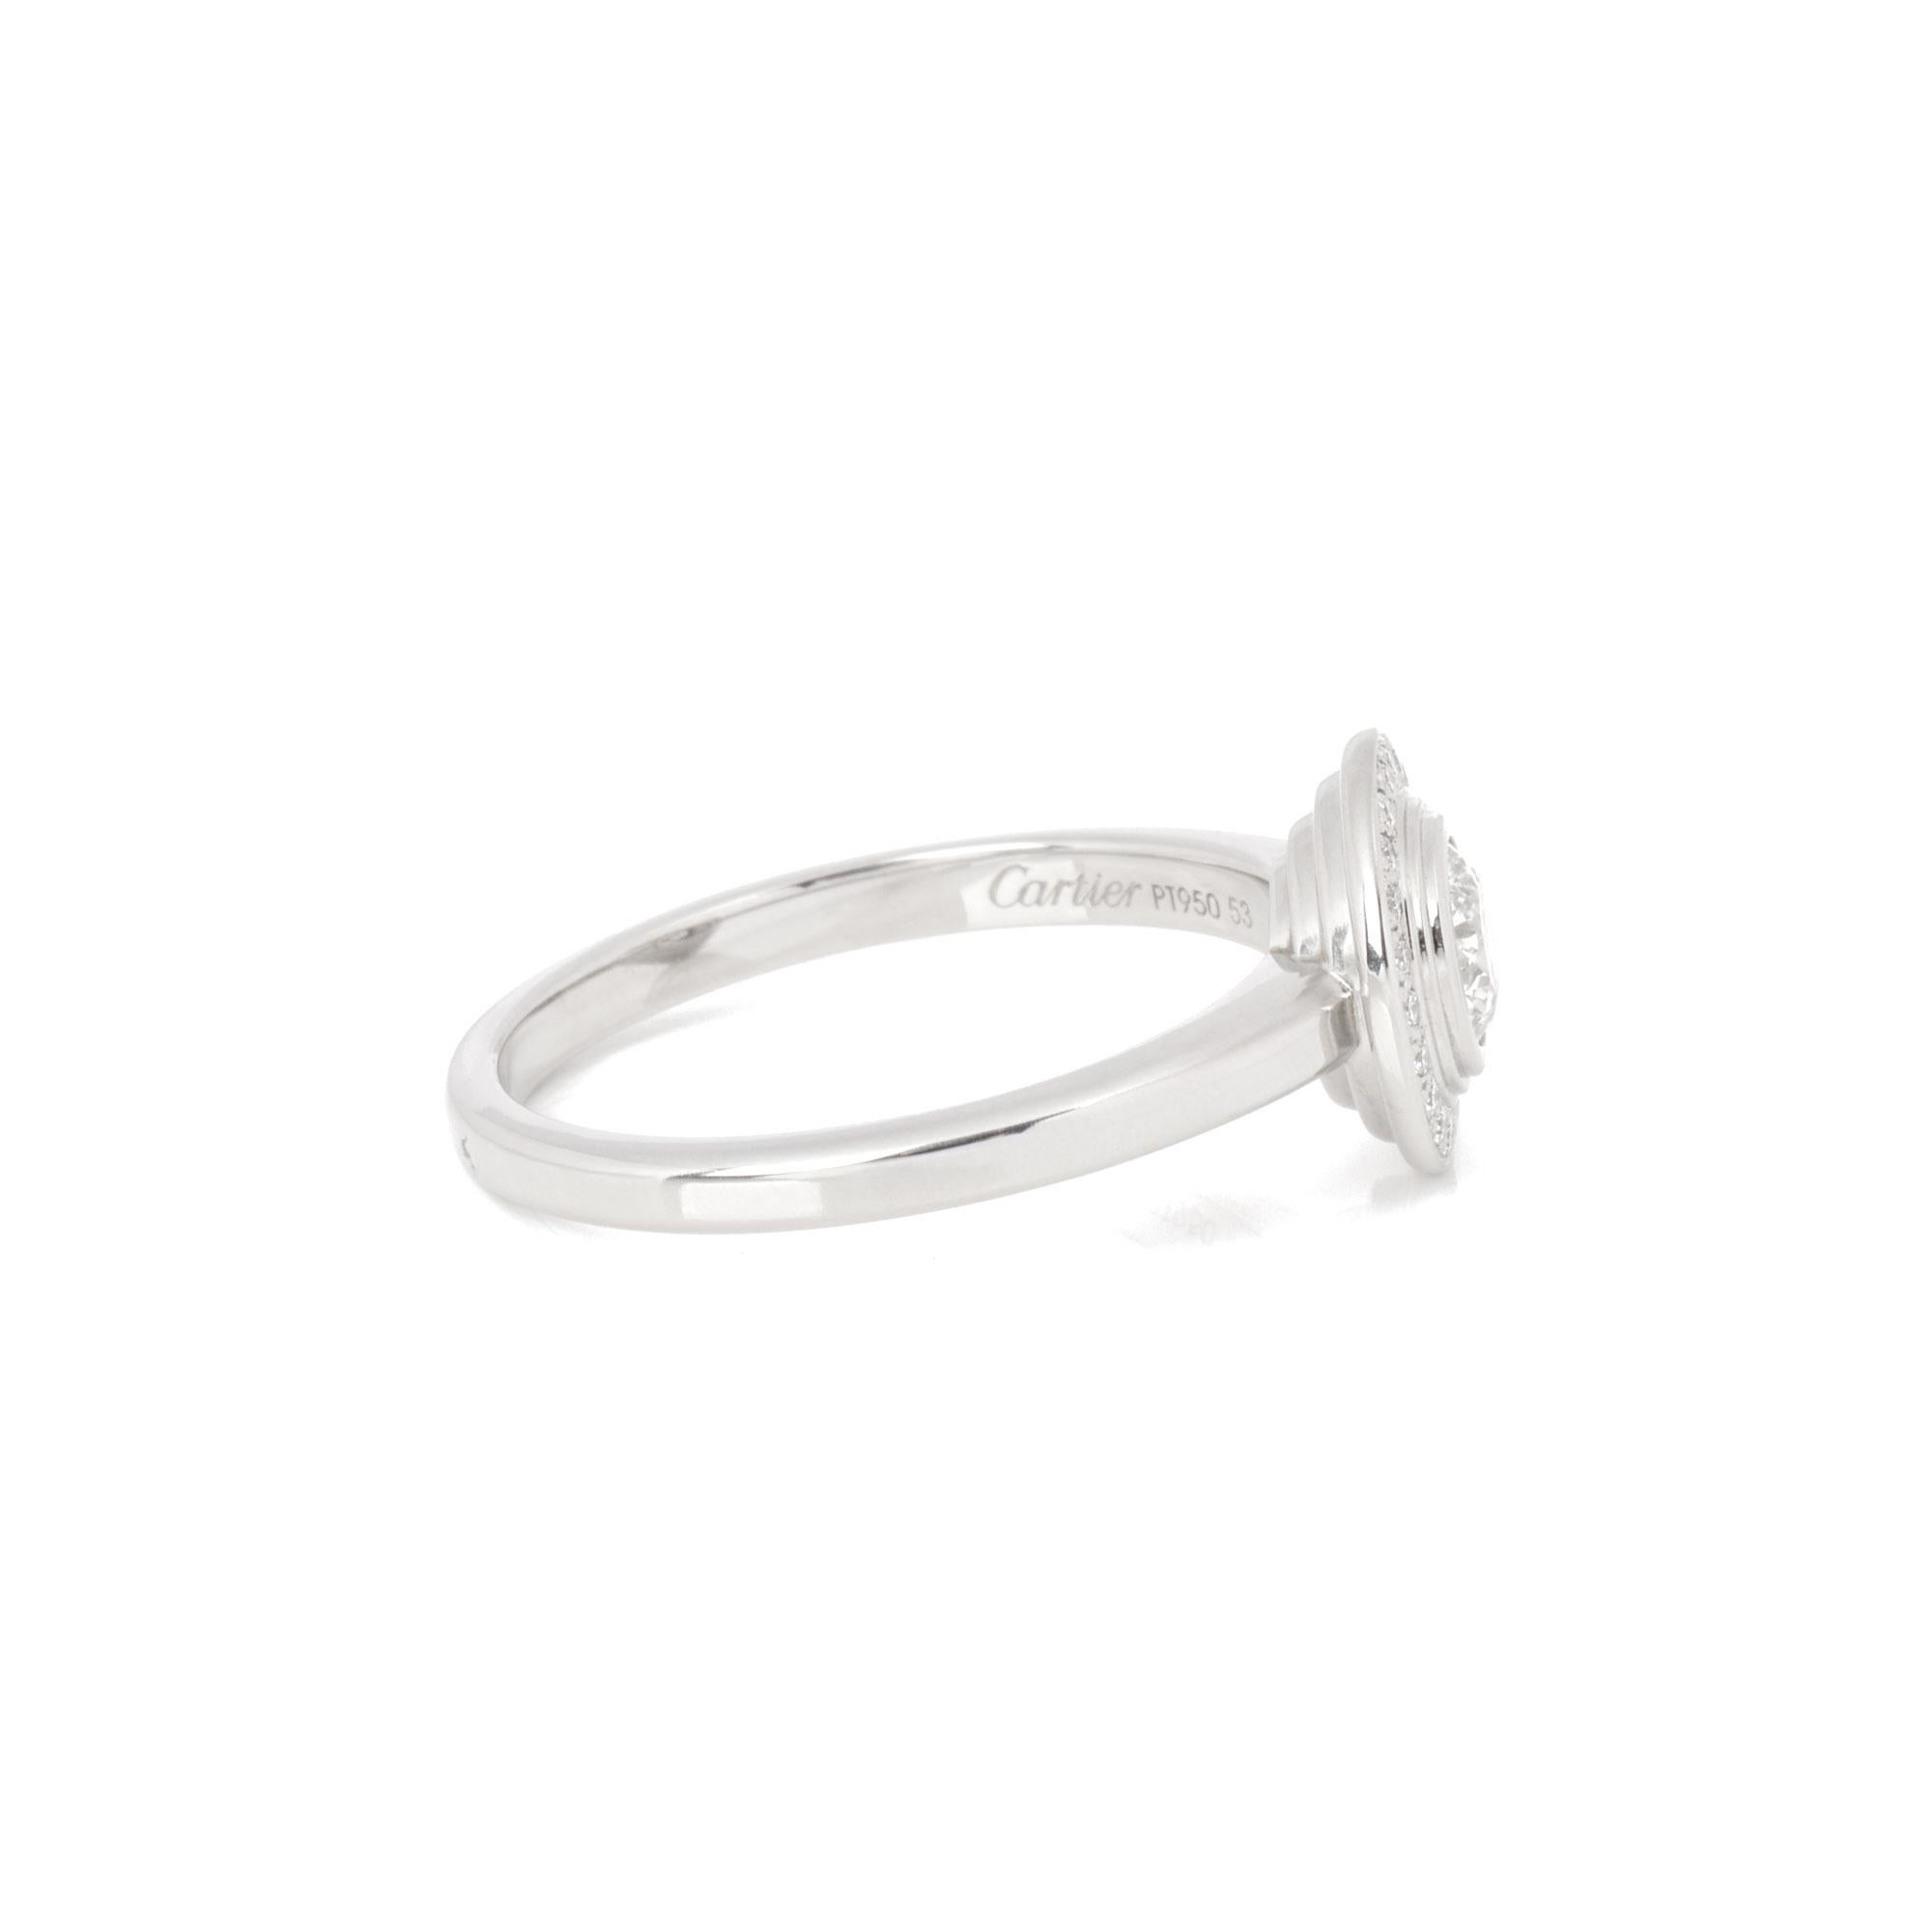 Cartier Diamond Halo Design Platinum D'amour Ring

Brand Cartier
Model Diamond D'amour Ring
Product Type Ring
Serial Number SD****
Age Circa 2013
Accompanied By Cartier Pouch, Certificate
Material(s) Platinum
Gemstone Diamond
Secondary Gemstone